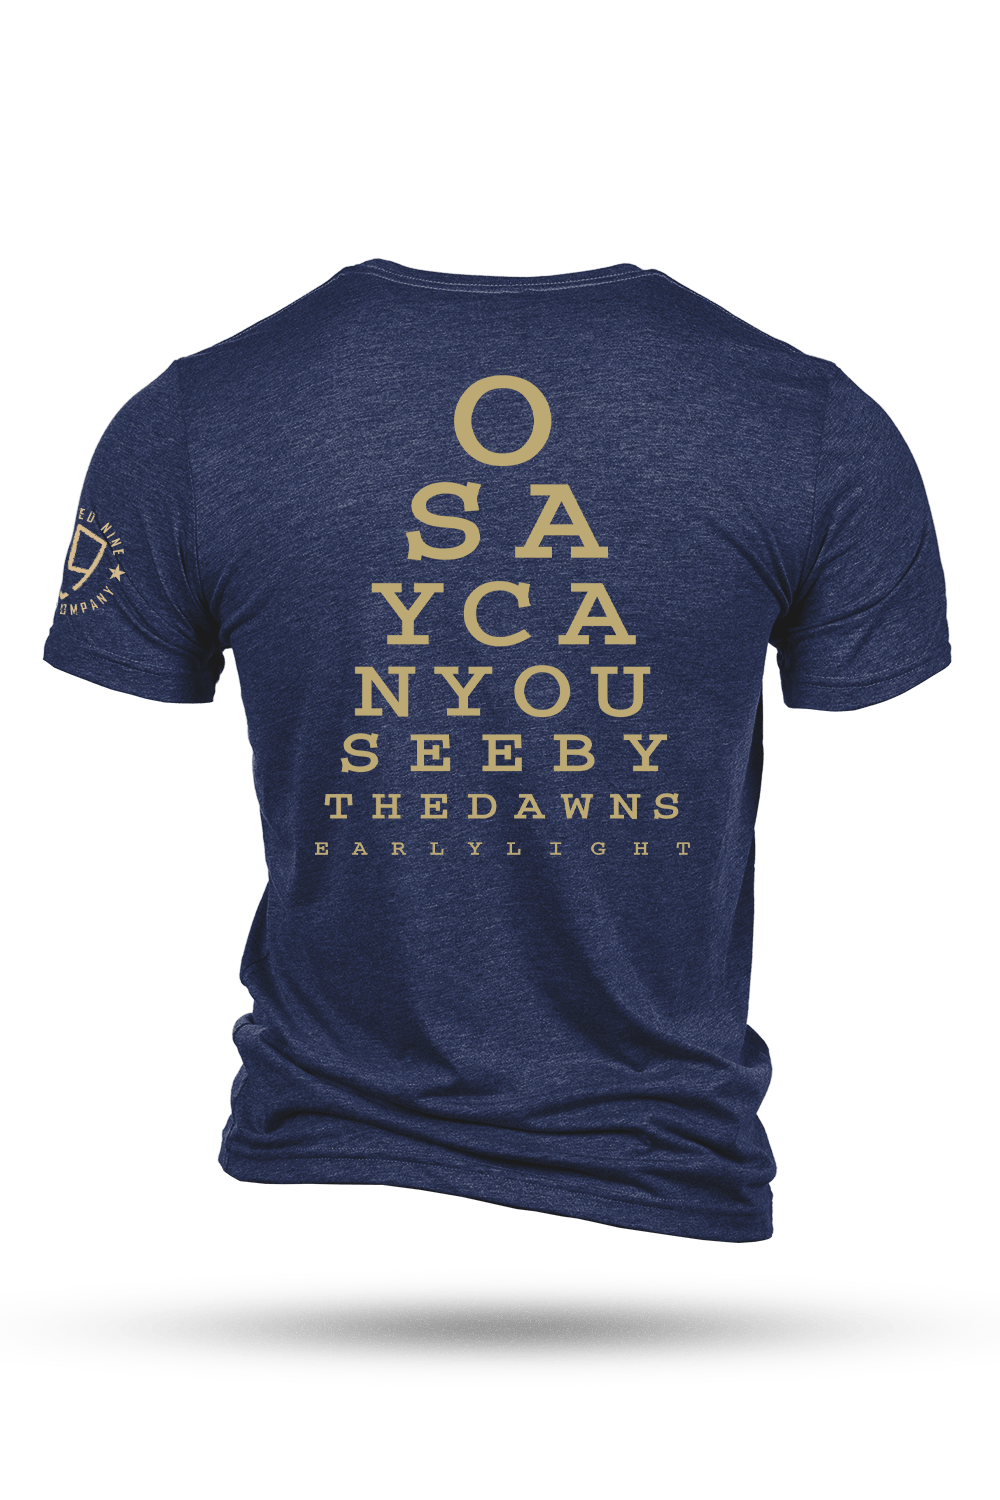 Enlisted 9 - Tri-Blend T-Shirt - Oh Say Can You See